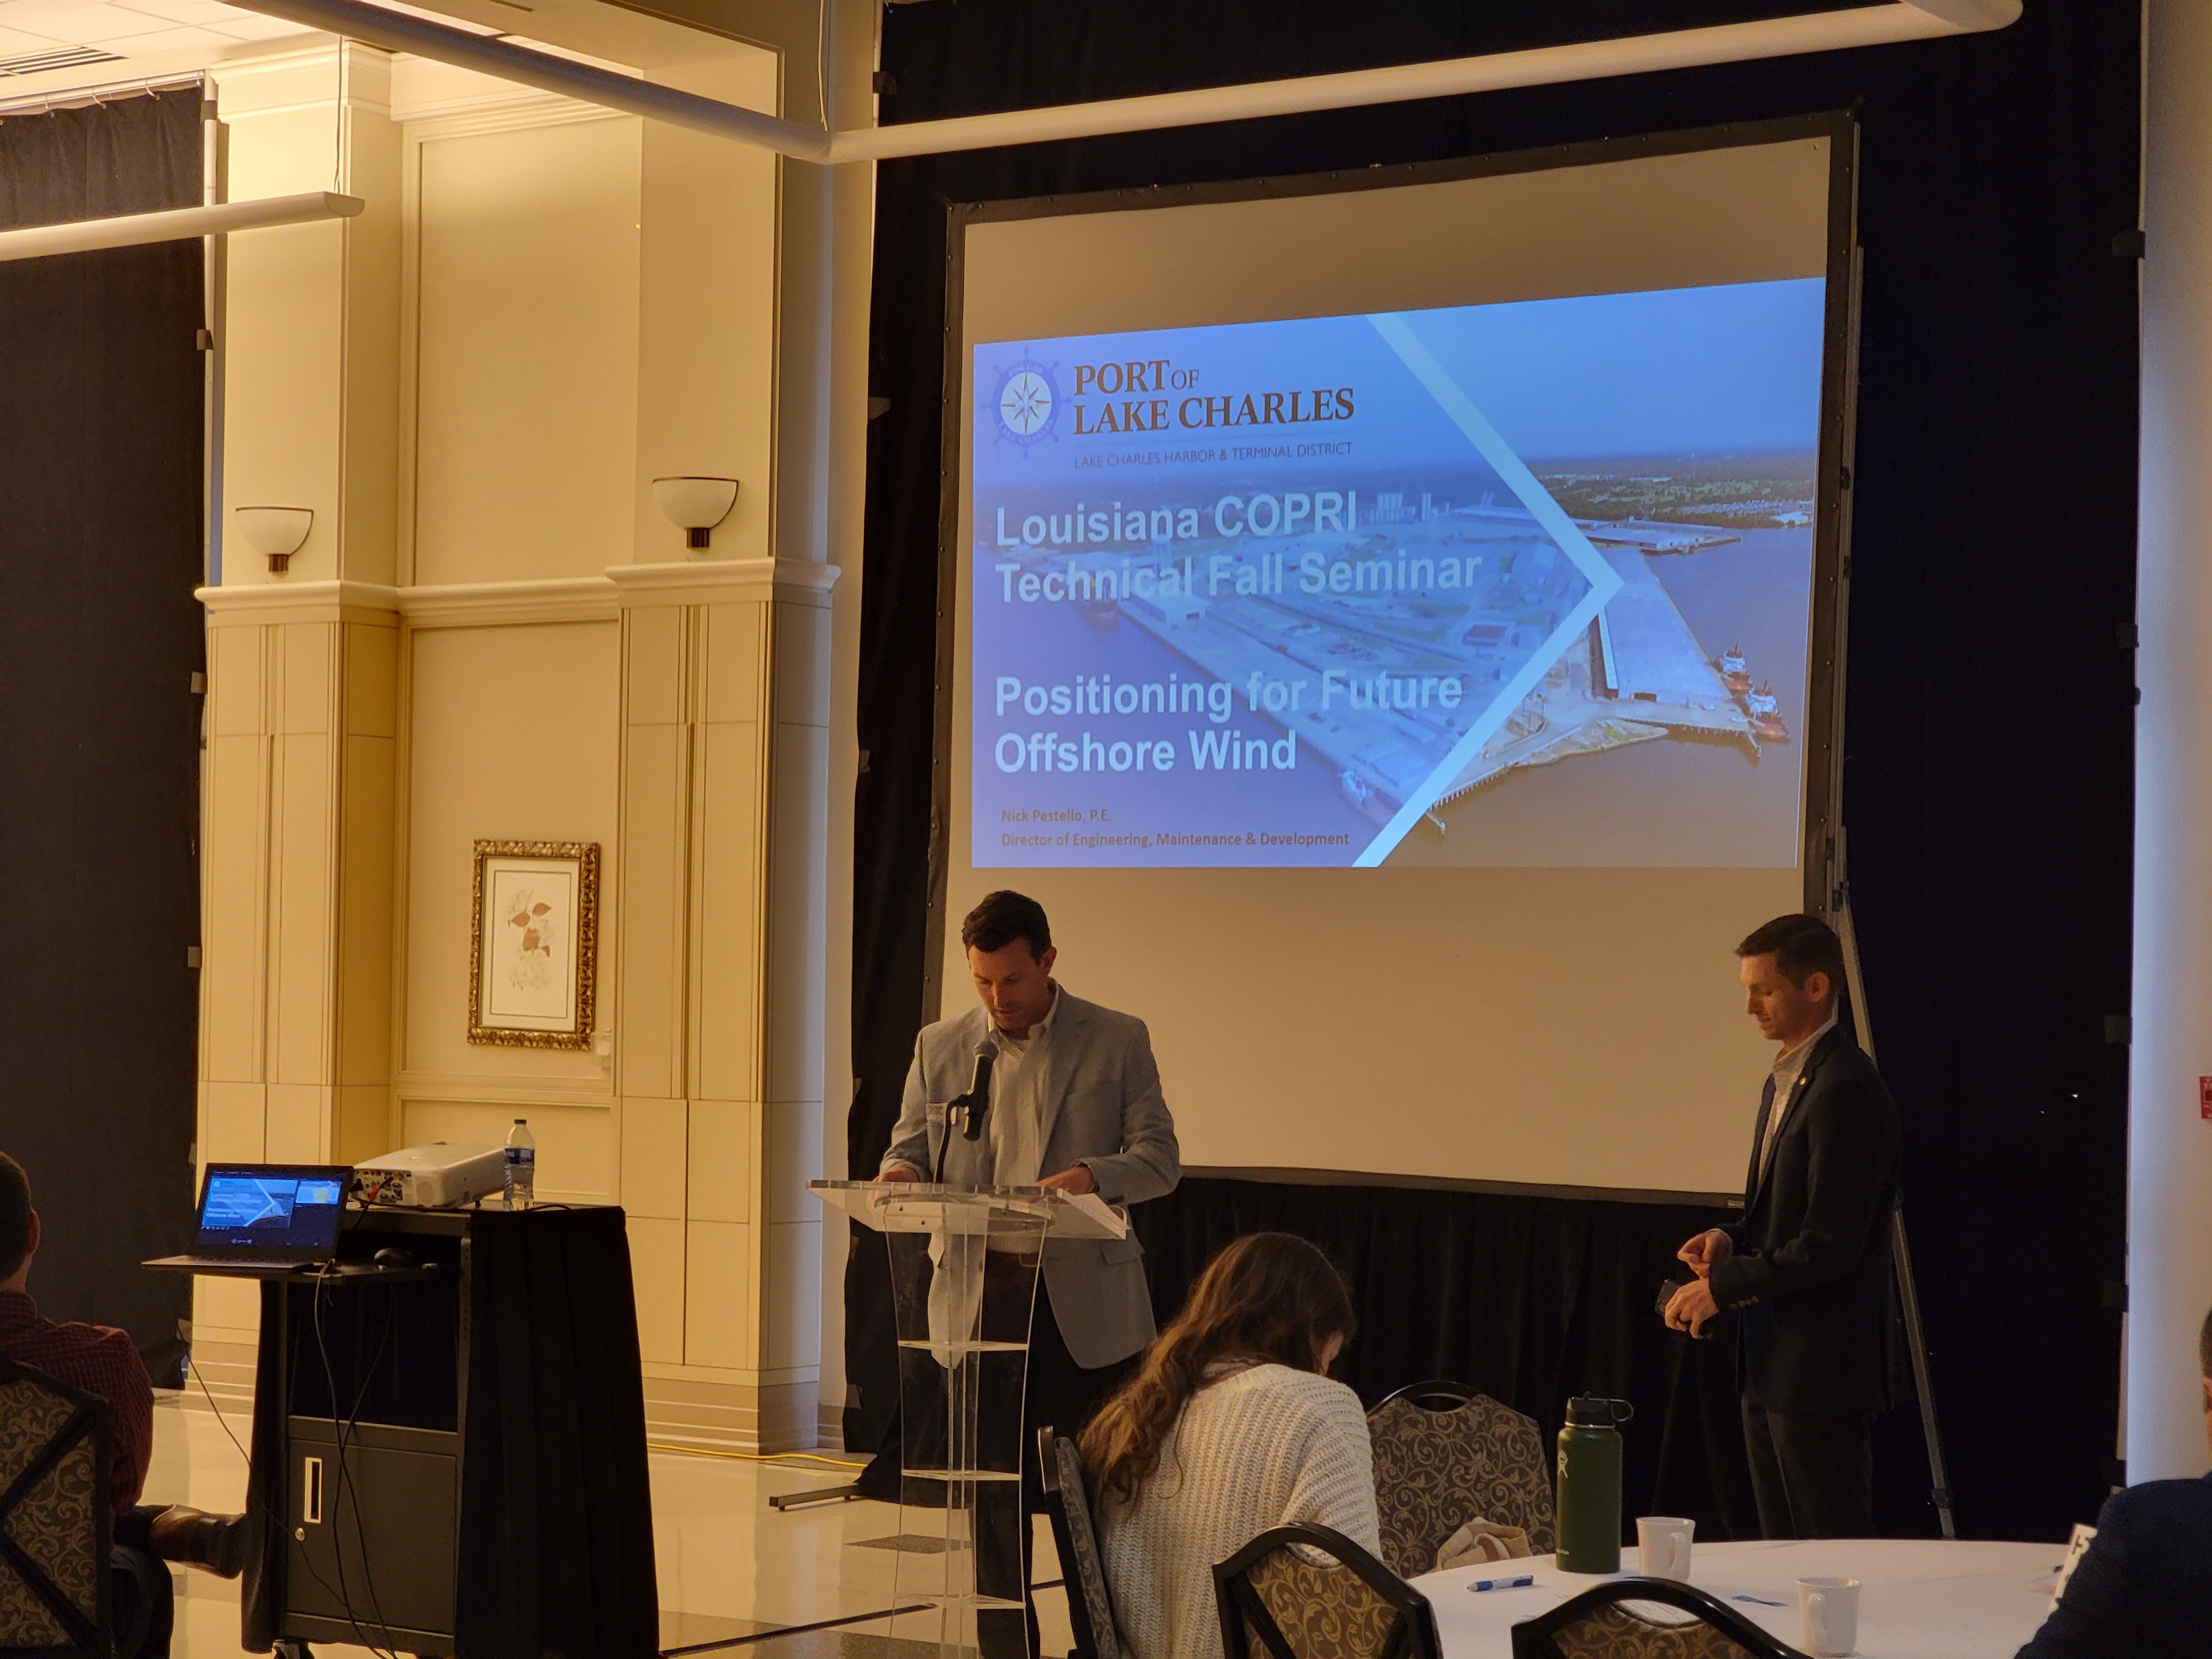 Former Programs Director, Brett McMann (left), introducing The Port of Lake Charles’ Director of Engineering, Maintenance & Development, Nick Pestello (Right), to discuss Positioning for Future Offshore Wind.